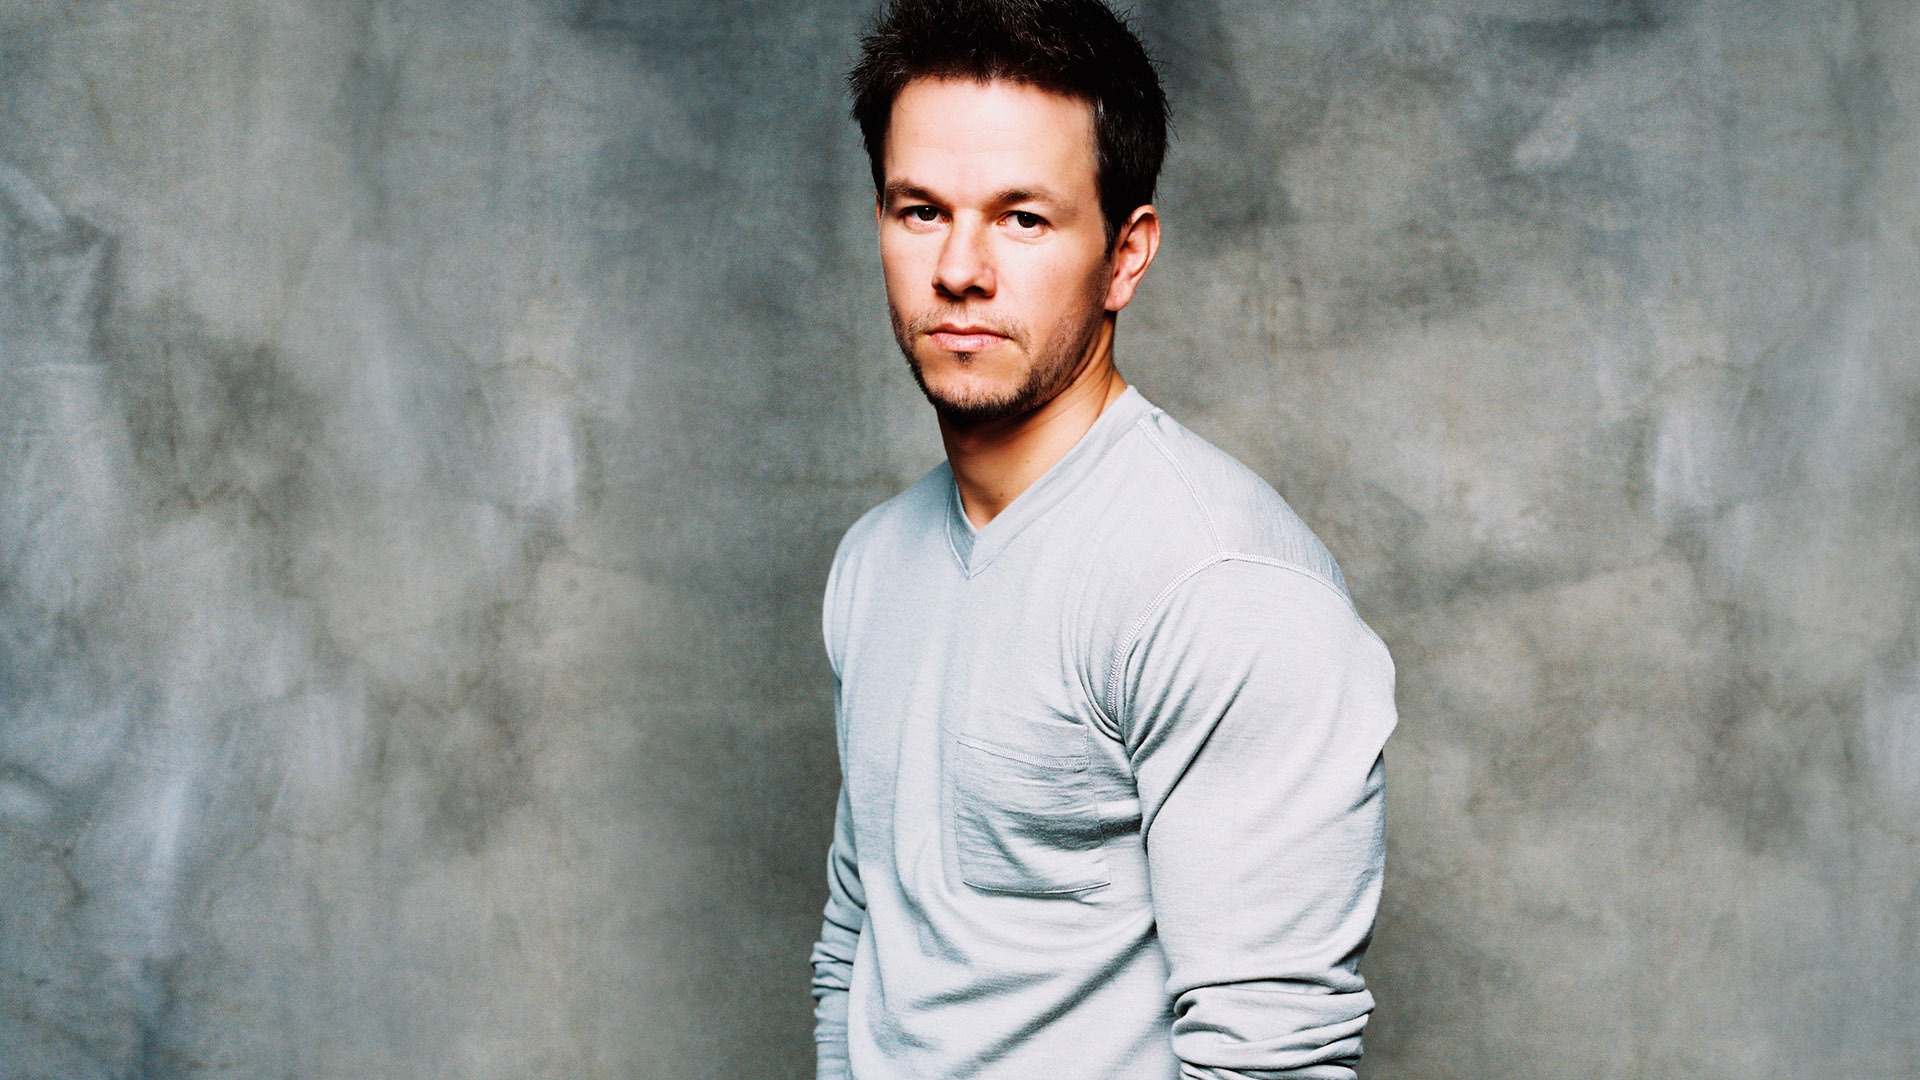 Mark Wahlberg Look for 1920 x 1080 HDTV 1080p resolution